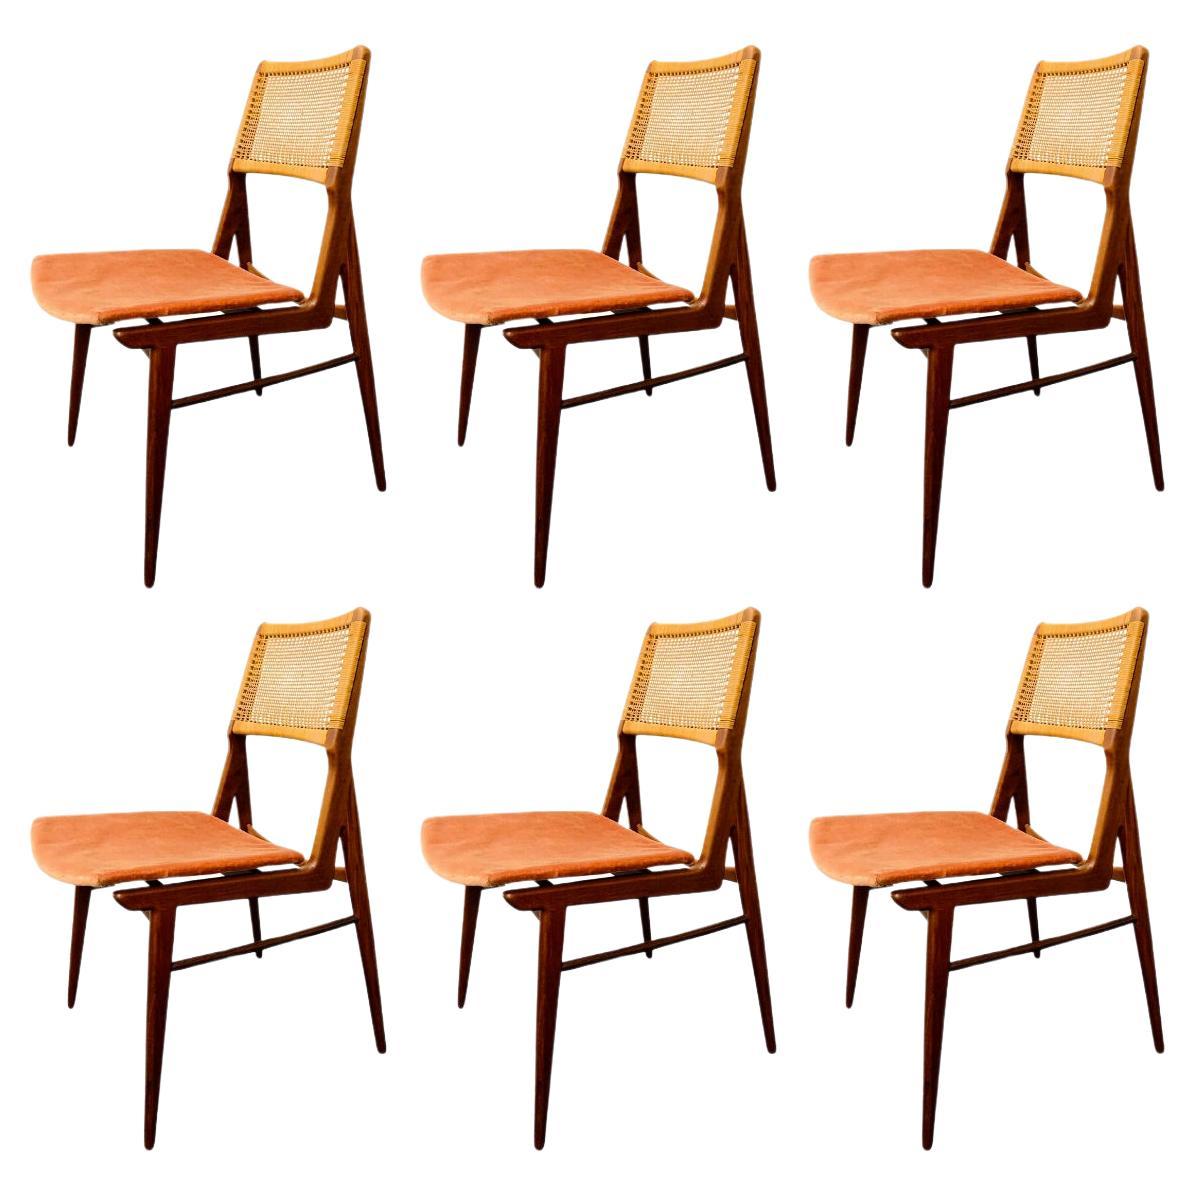 Set of 6 Beautiful Teakwood Dining Chairs For Sale